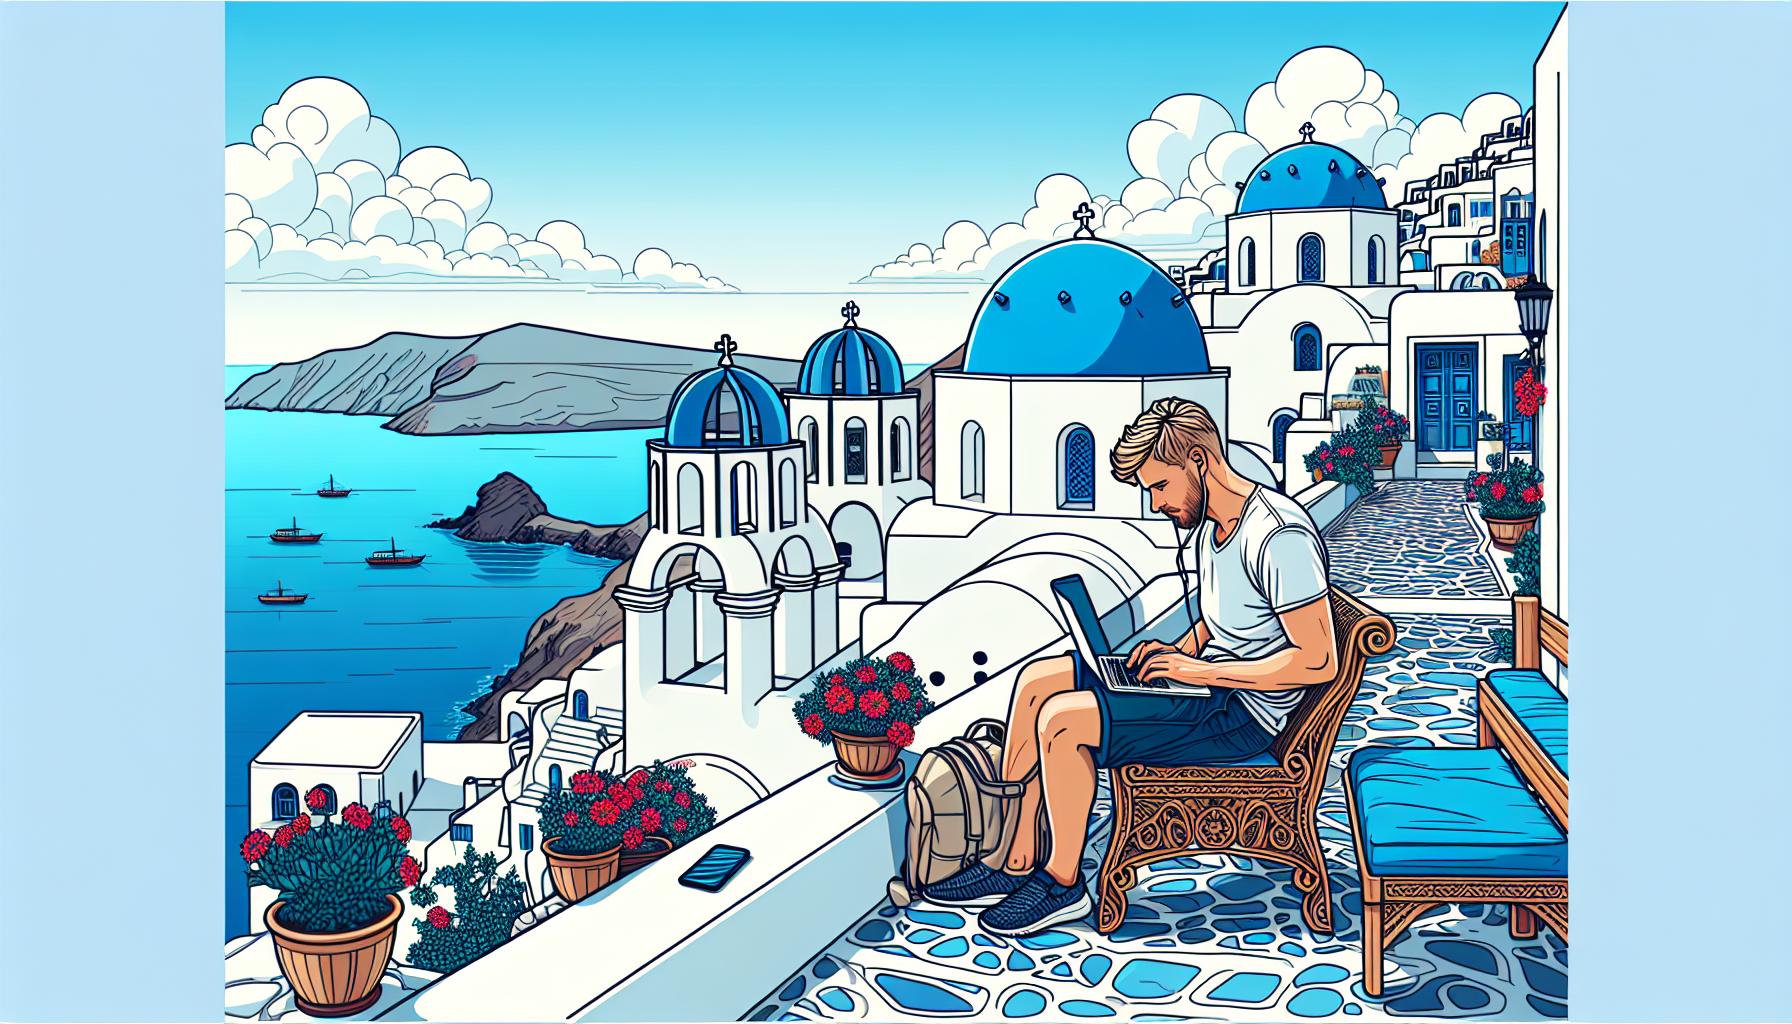 Destinations The 8 Best Greek Islands for Digital Nomads ReallyRemoteWorker Discover the top Greek islands for digital nomads in our comprehensive guide. Learn about each island's unique offerings, from reliable internet connectivity to affordable living costs and stunning views. Live, work, and play in Santorini, Mykonos, Crete, and more! Find your perfect digital nomad paradise in Greece today.